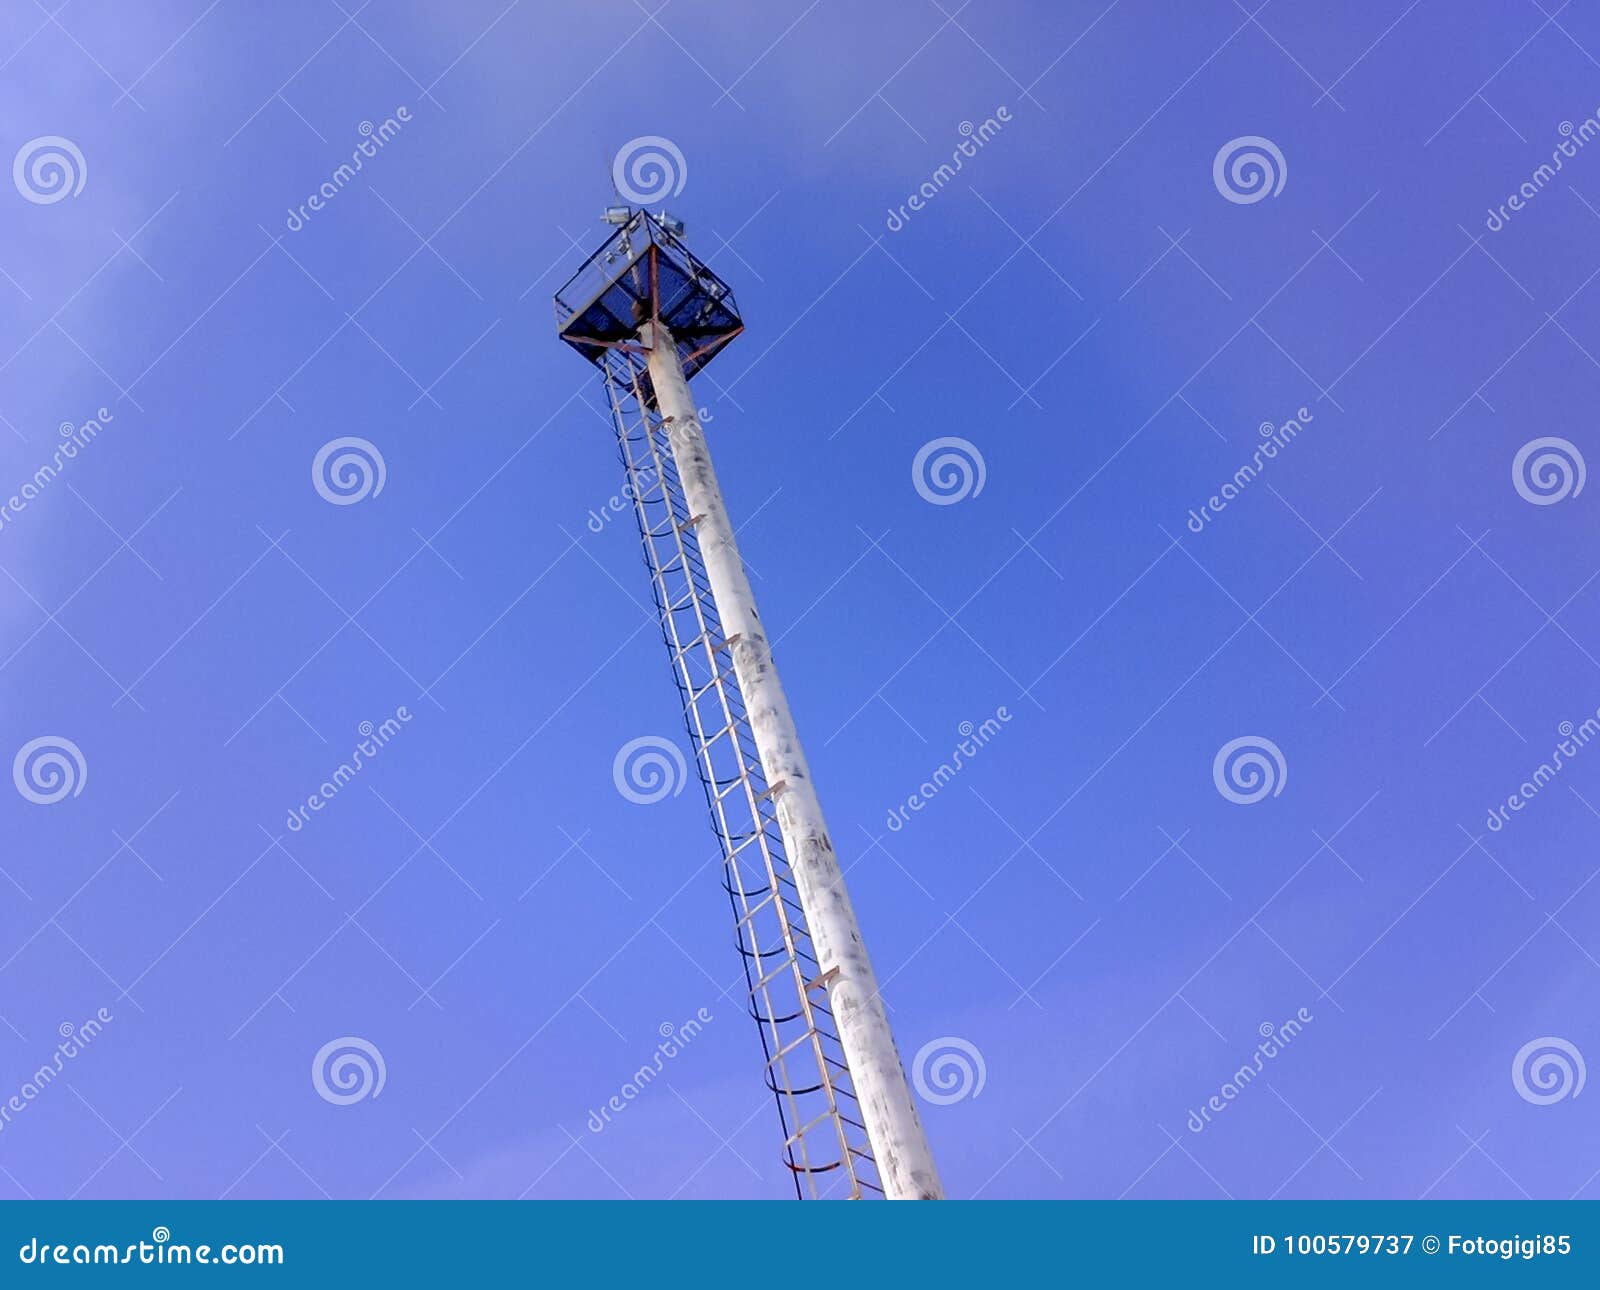 Mast Lighting on a Blue Sky Background. Mast with Lightning Rod and ...